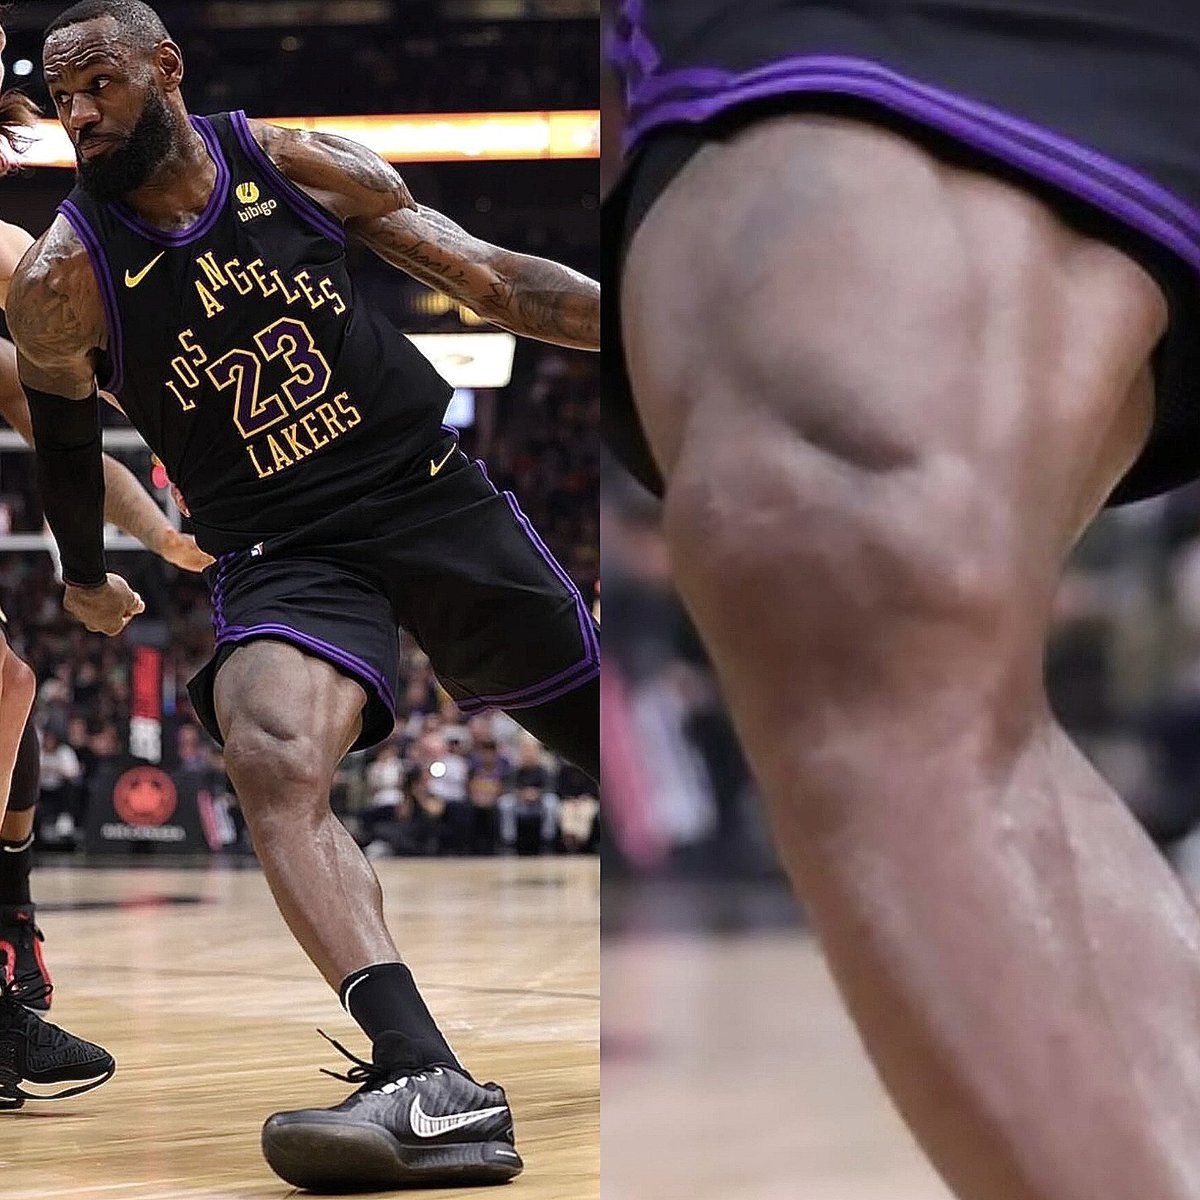 Next time someone says to not get “too bulky” cause it’ll make you slow… Remind them that if done correctly, it’ll only HELP you get FASTER This is a 39 yr old Lebron James who spends millions on his body each year & trains year round